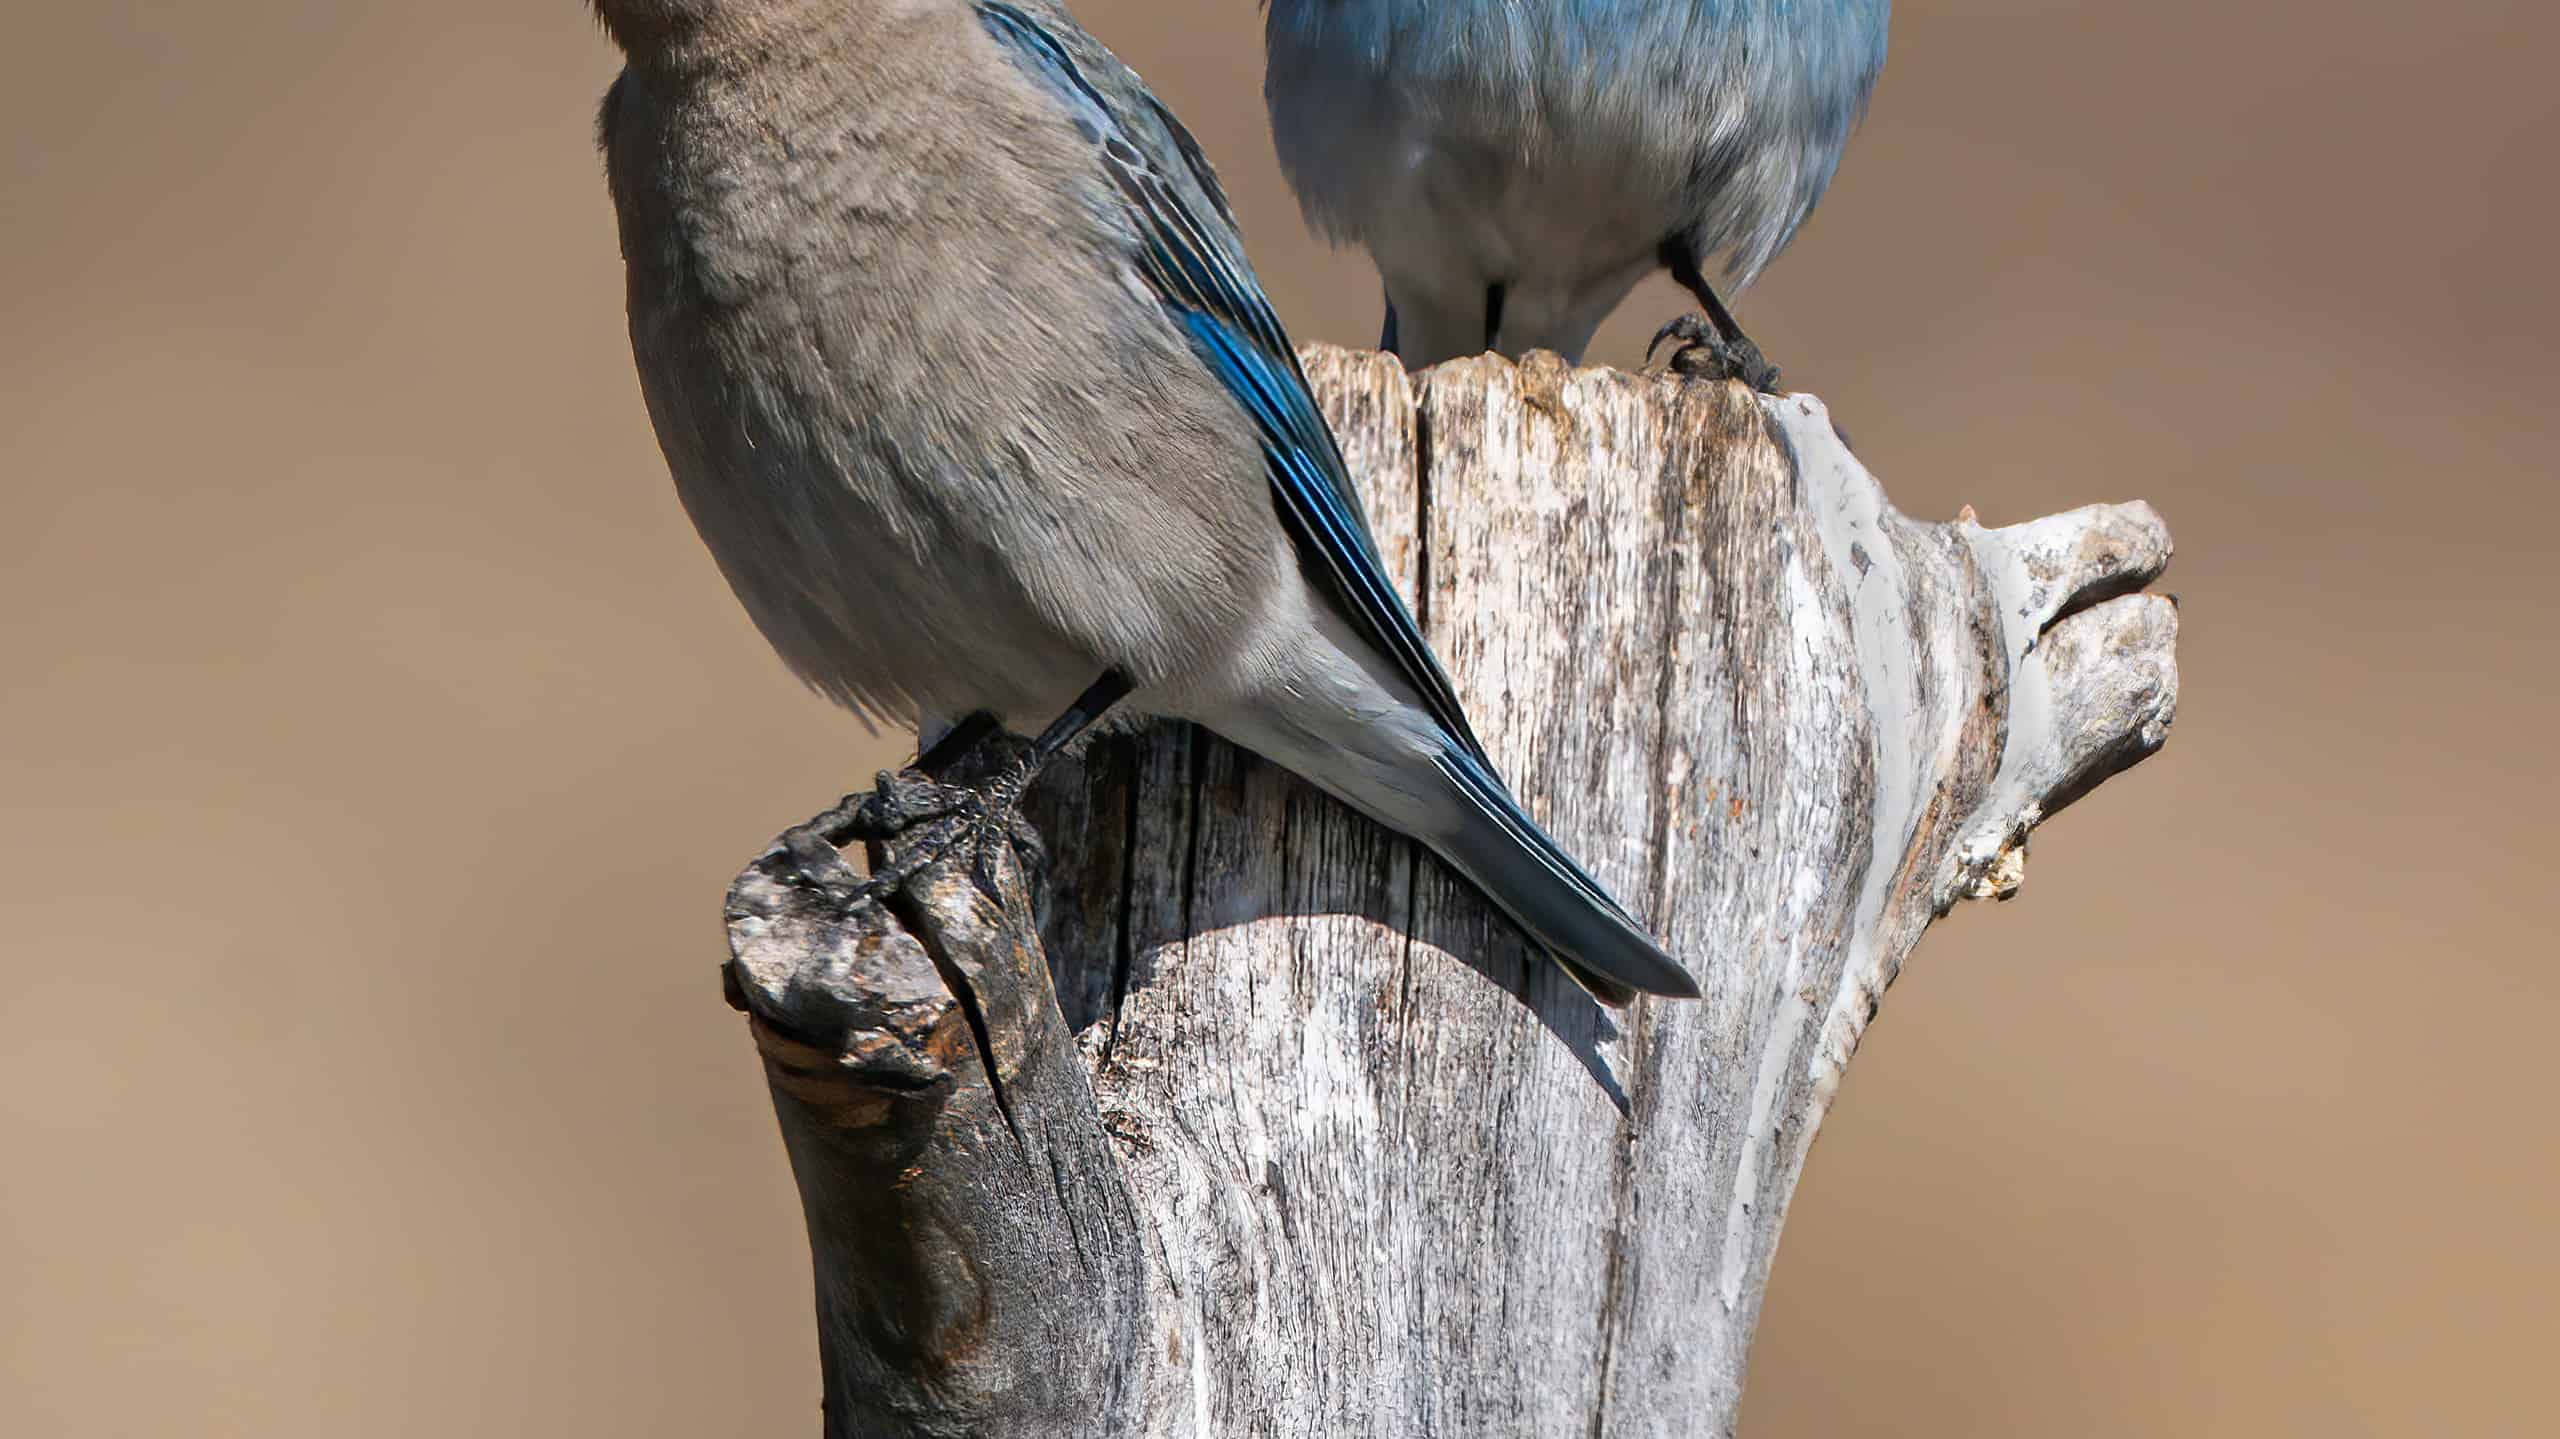 A pair of Mountain Bluebirds pause for a rest during their house hunting expedition.